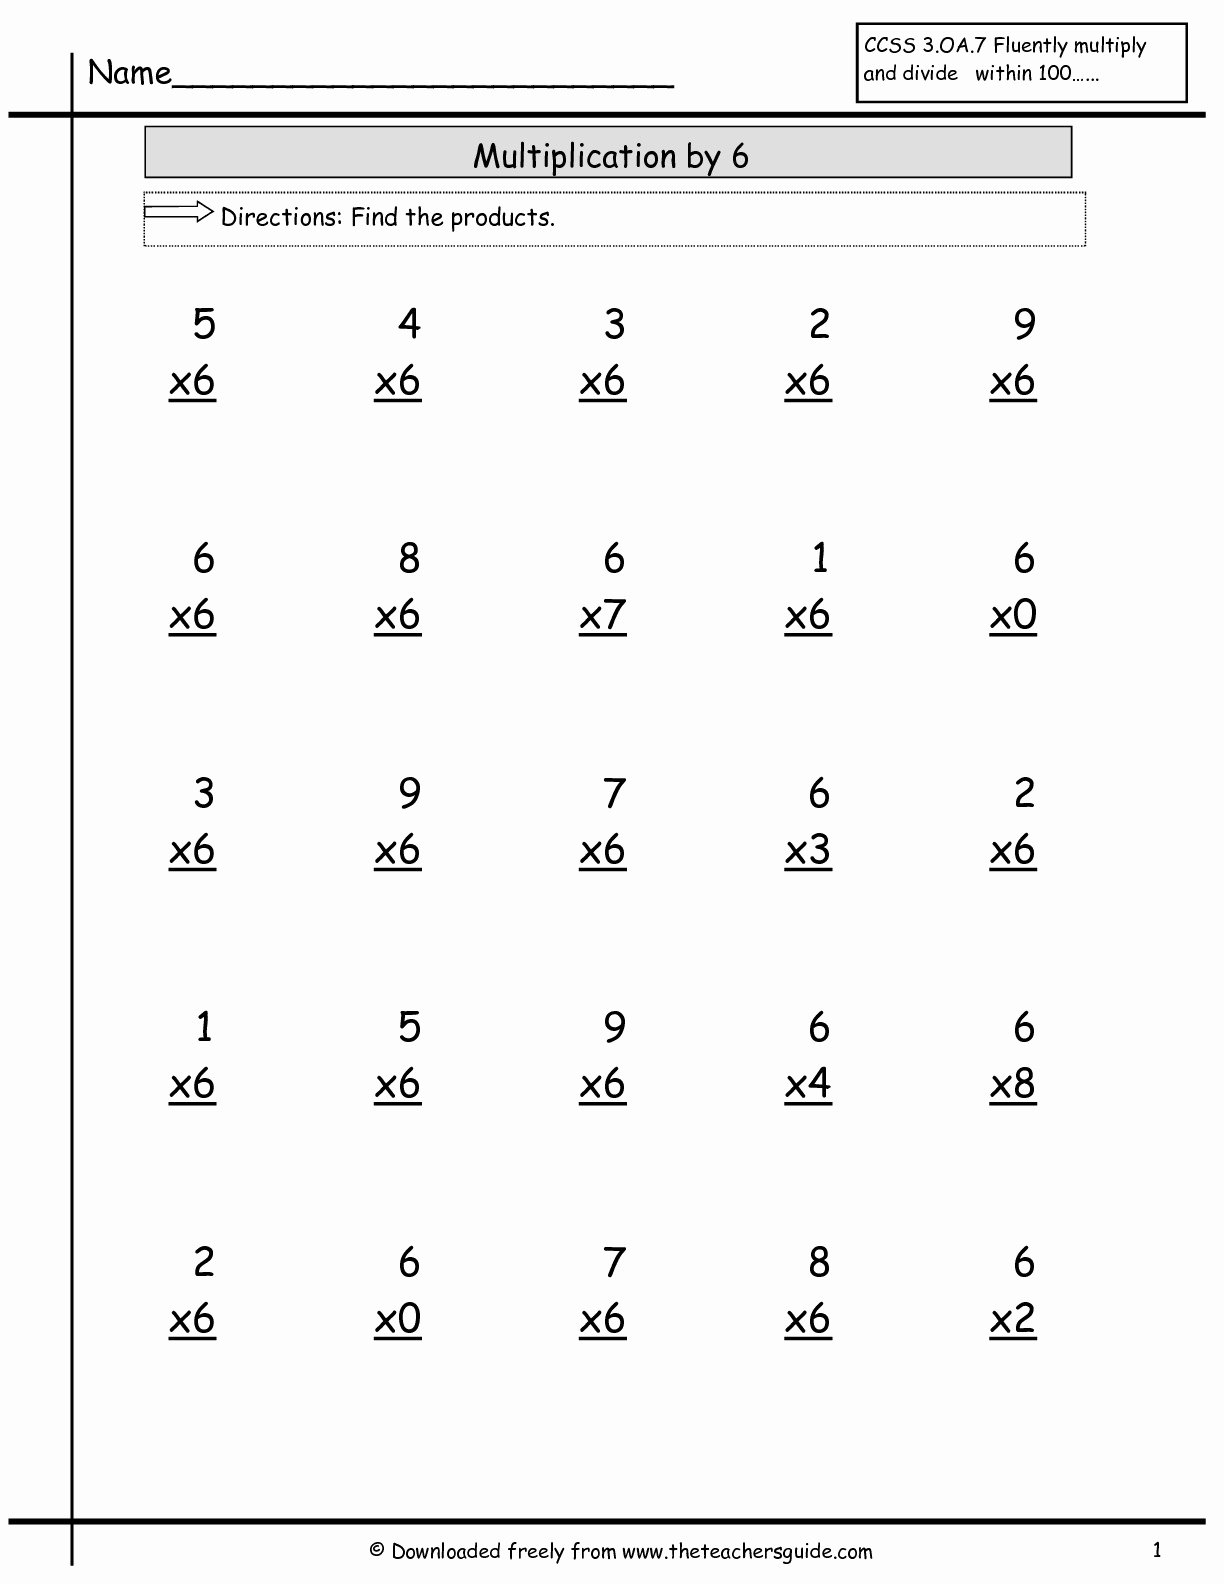 Multiplying by 6 Worksheet Fresh Multiplication Facts Worksheets From the Teacher S Guide